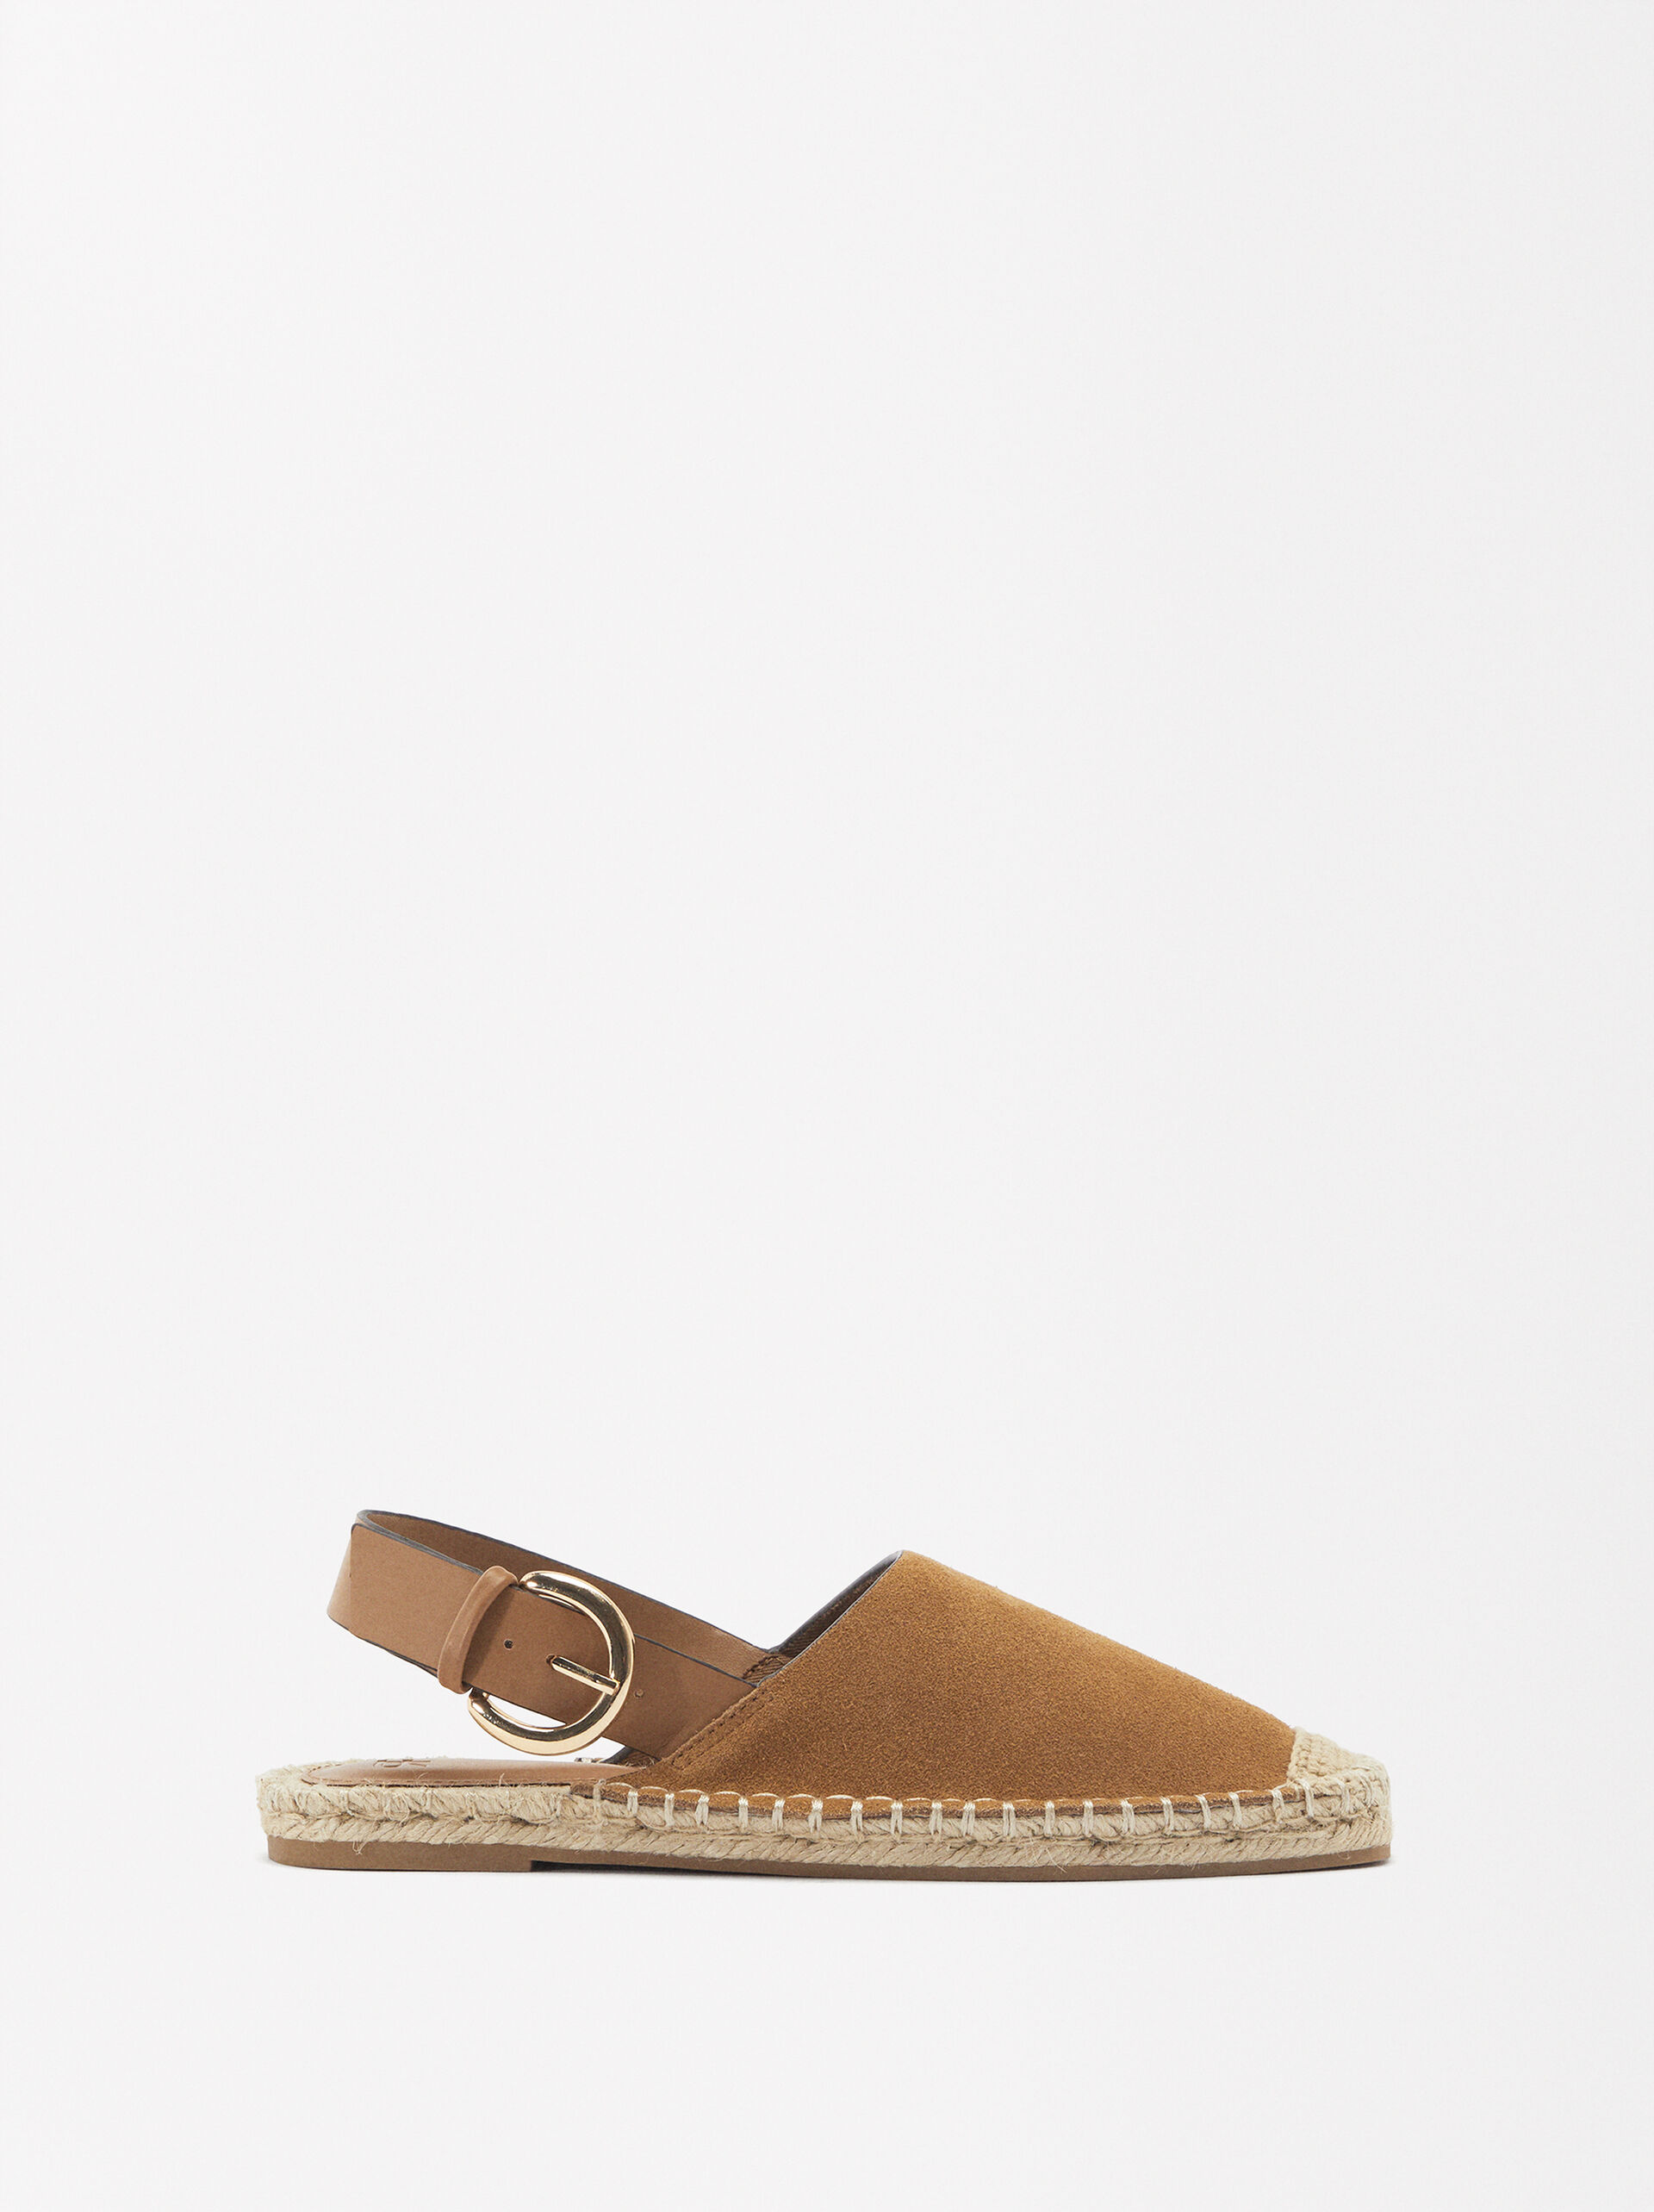 Leather And Jute Espadrilles image number 1.0